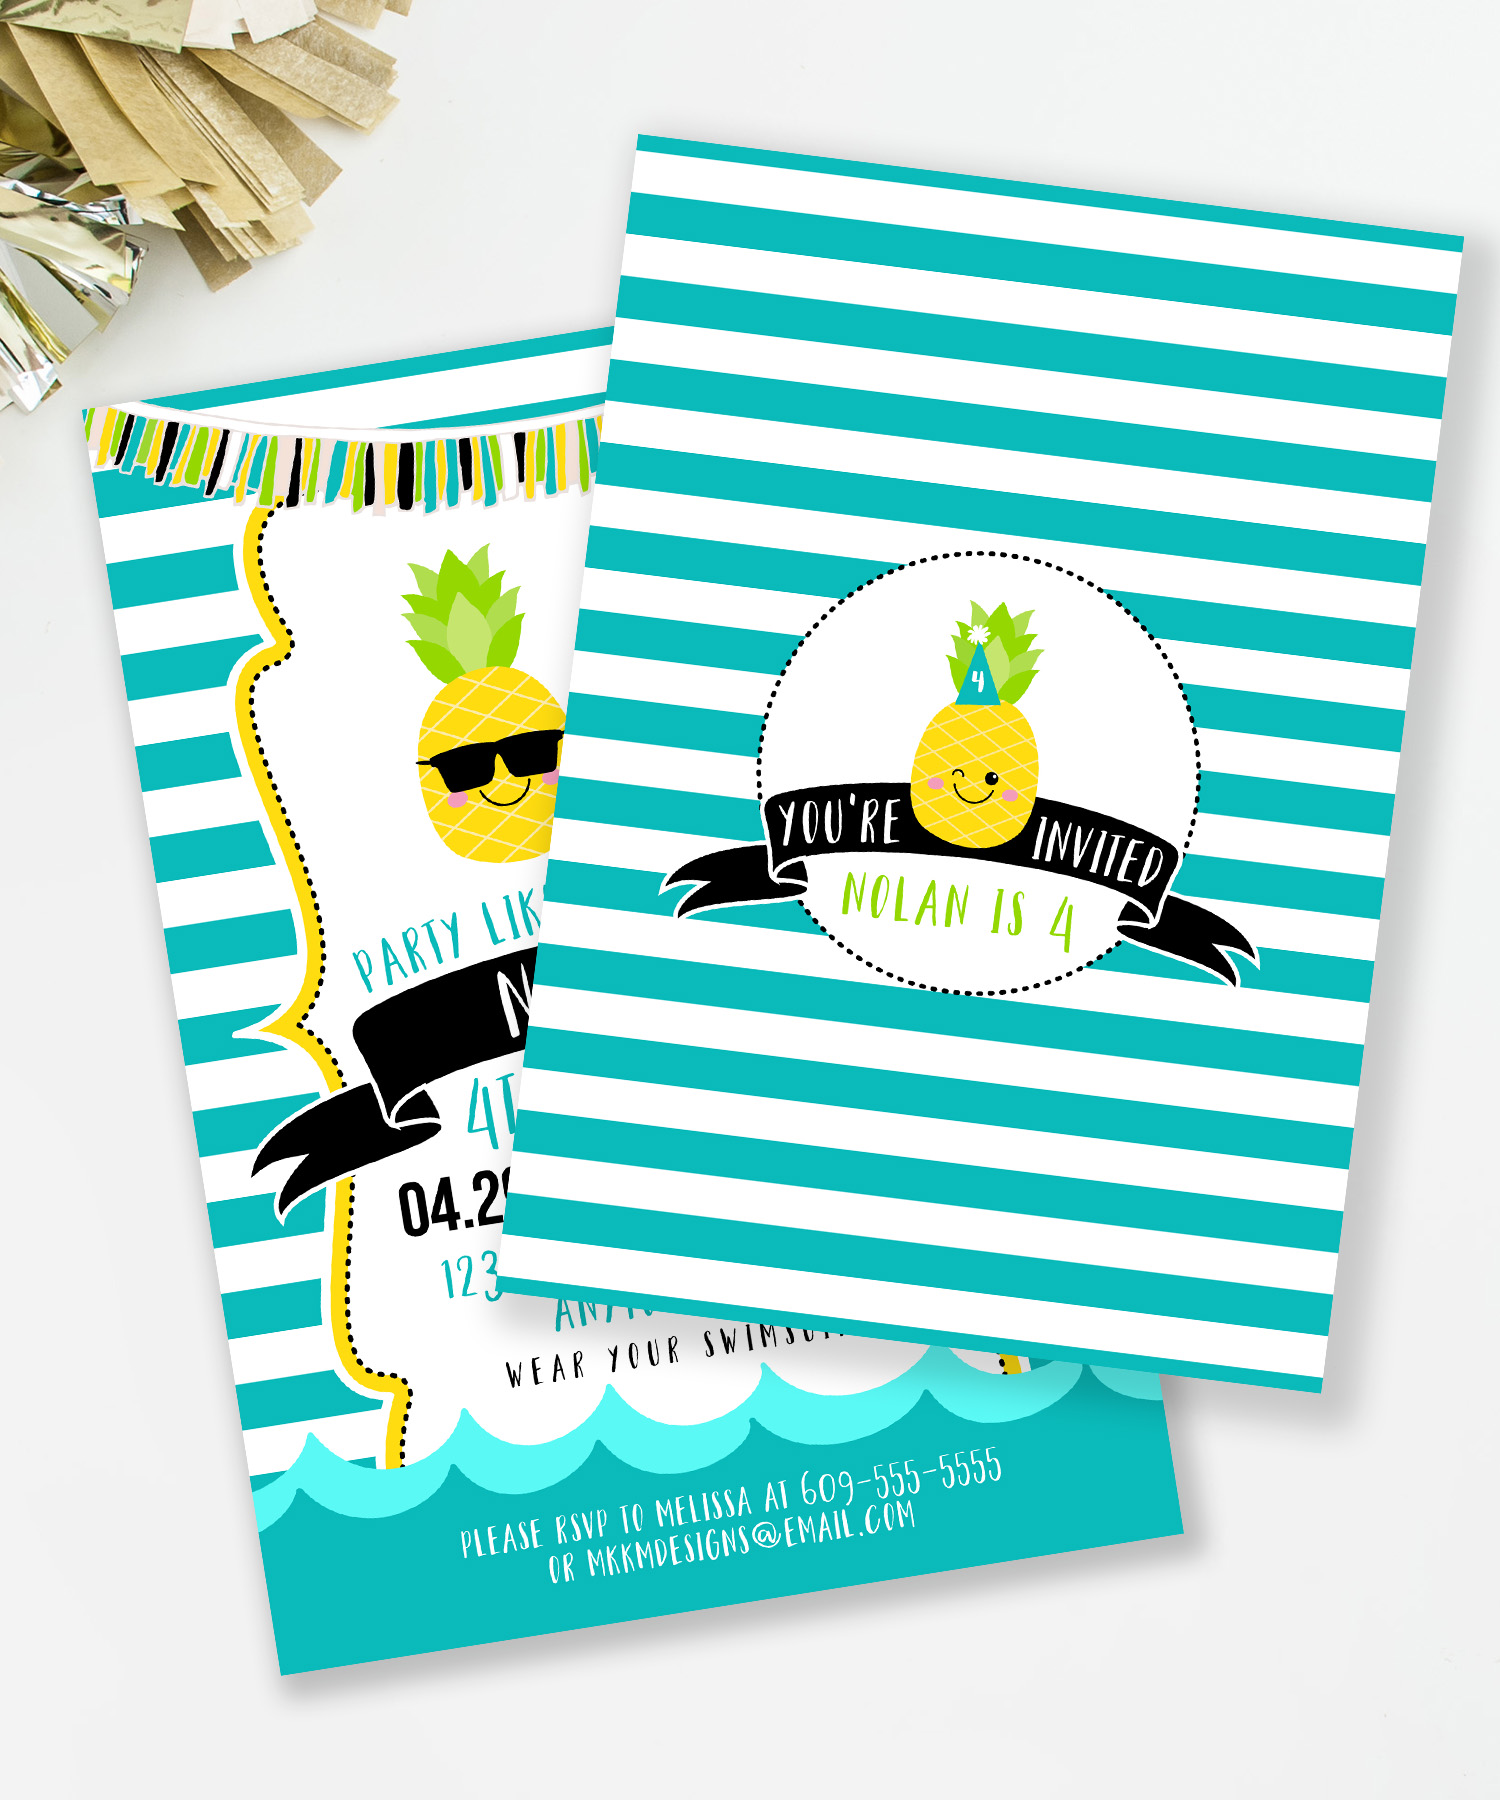 Pineapple party invitations from MKKM Designs